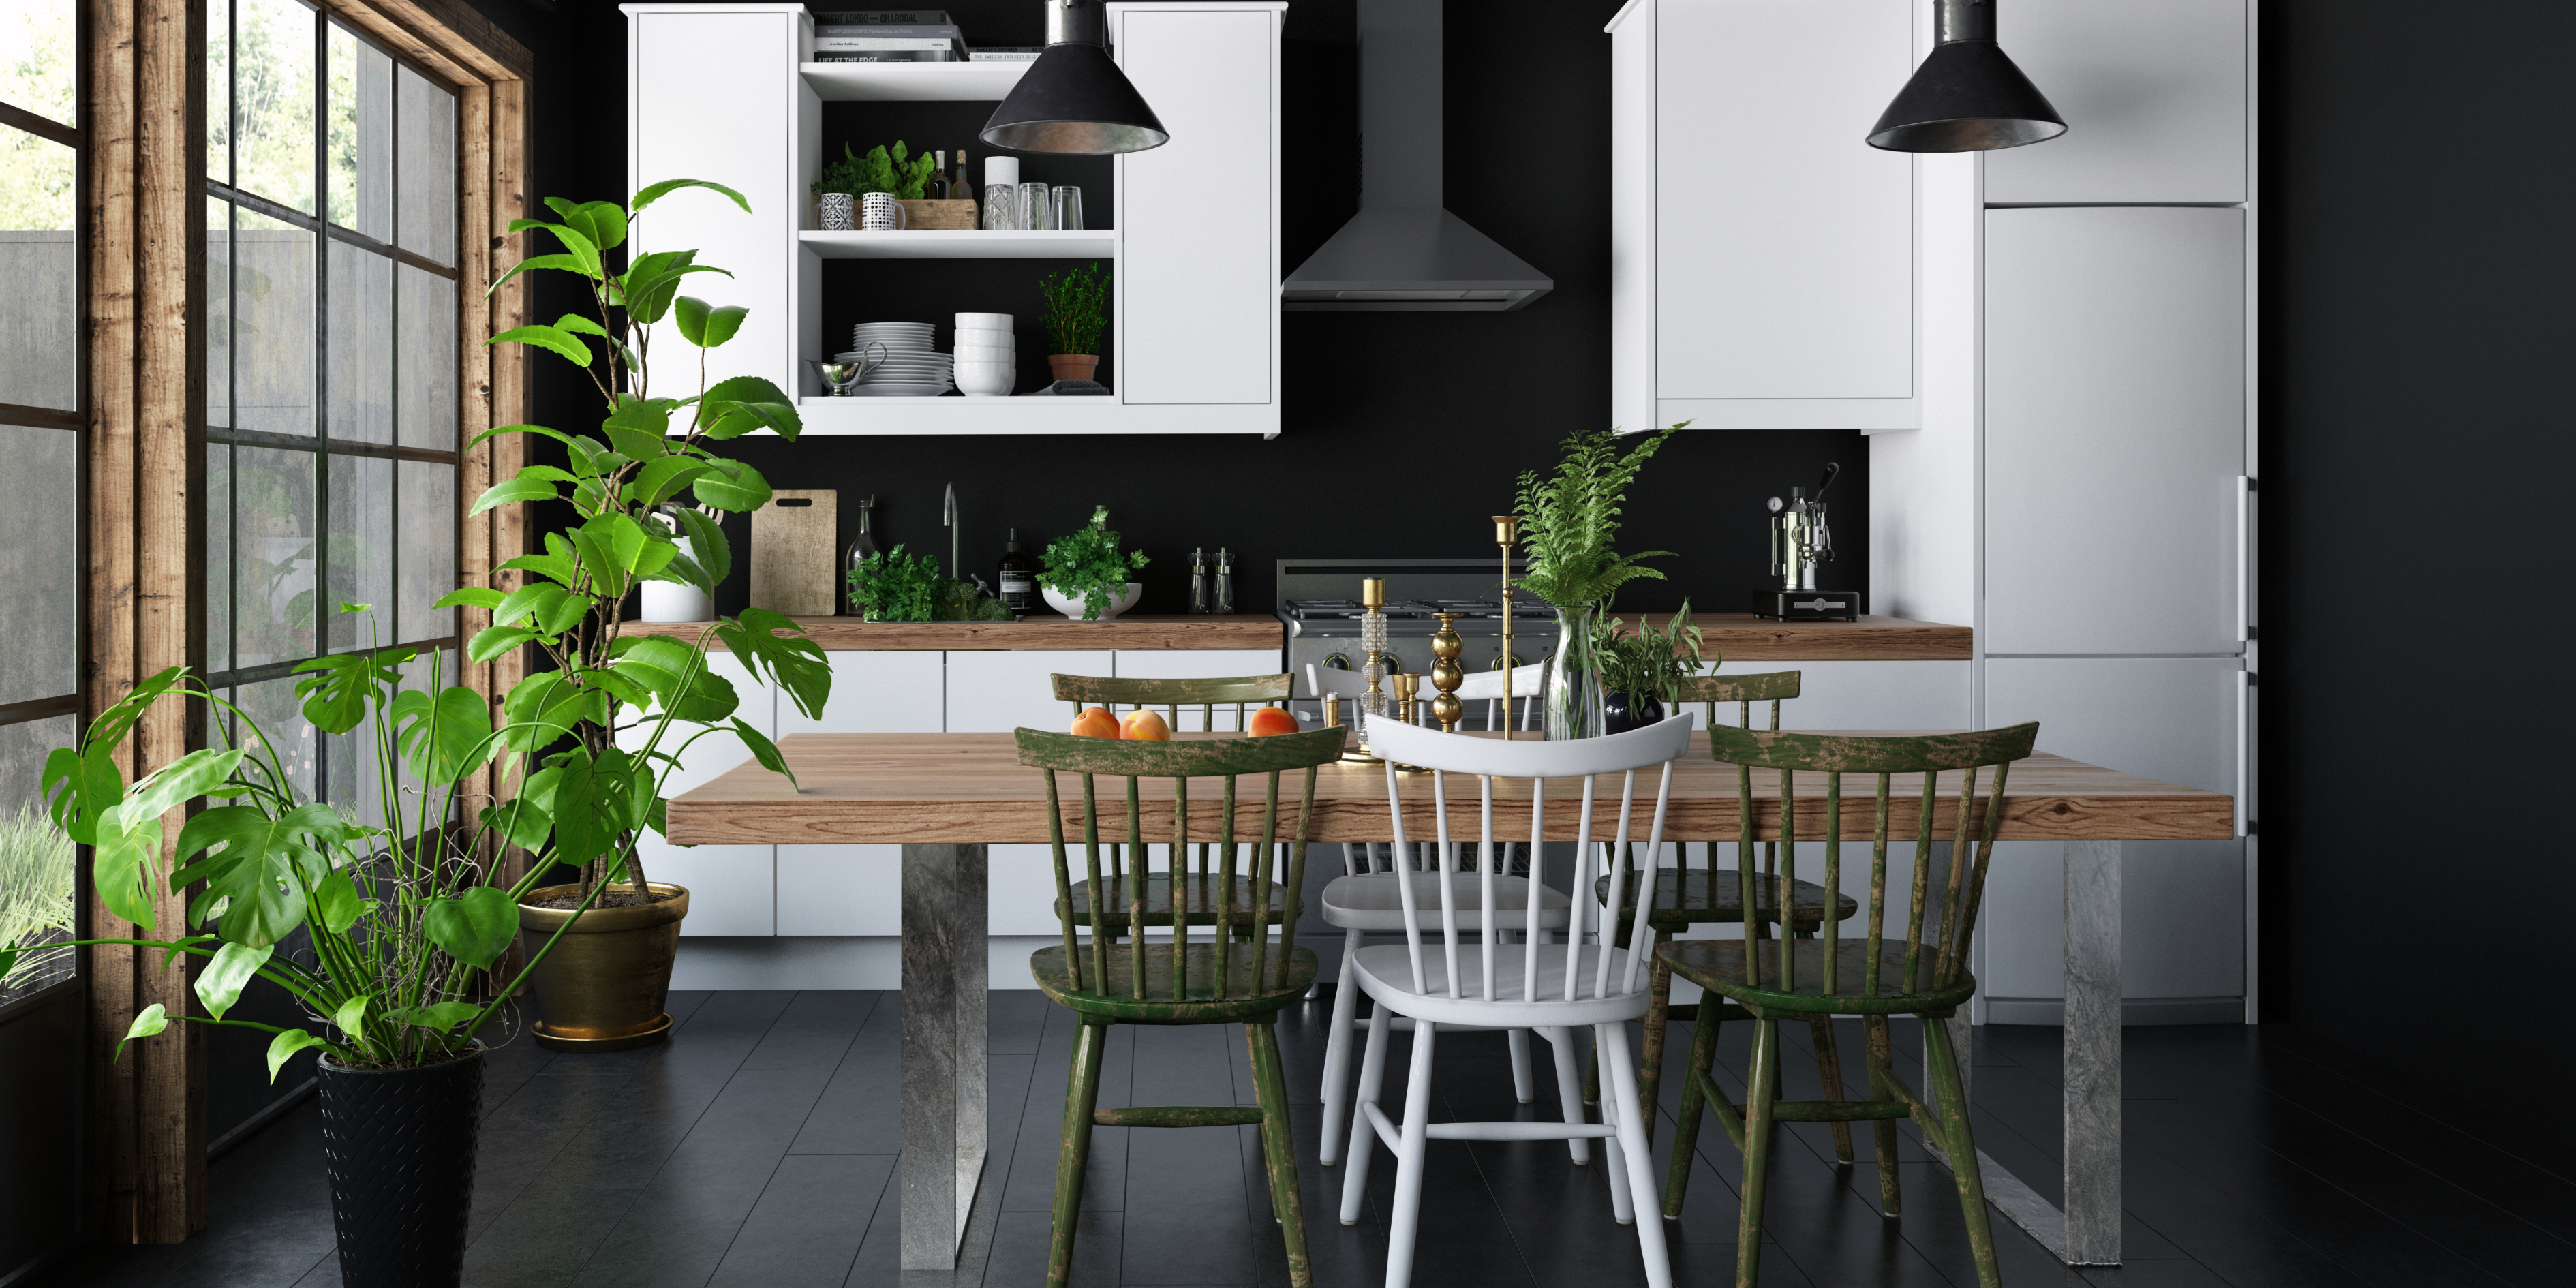 A modern industrial kitchen with black walls and flooring, white cabinetry, and wooden benches. There are floor to ceiling windows and plenty of plants to make the space more green and open.